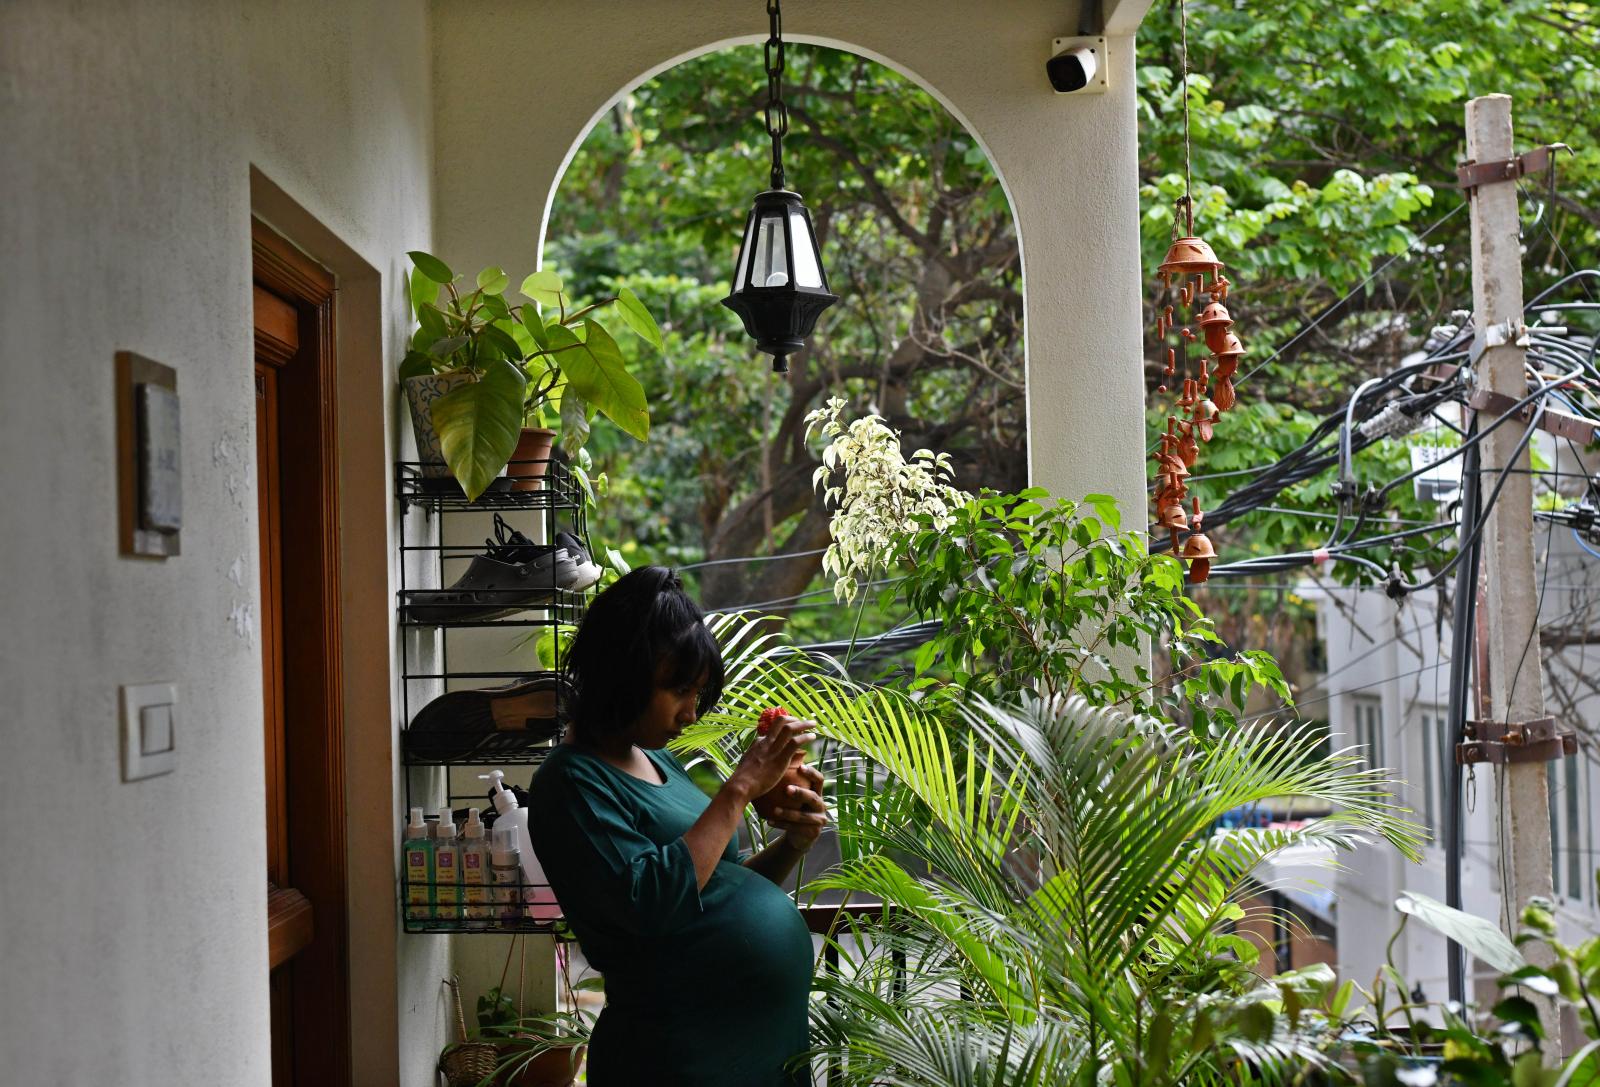 Varsha a veterinarian keeps her...elf busy reading and gardening.